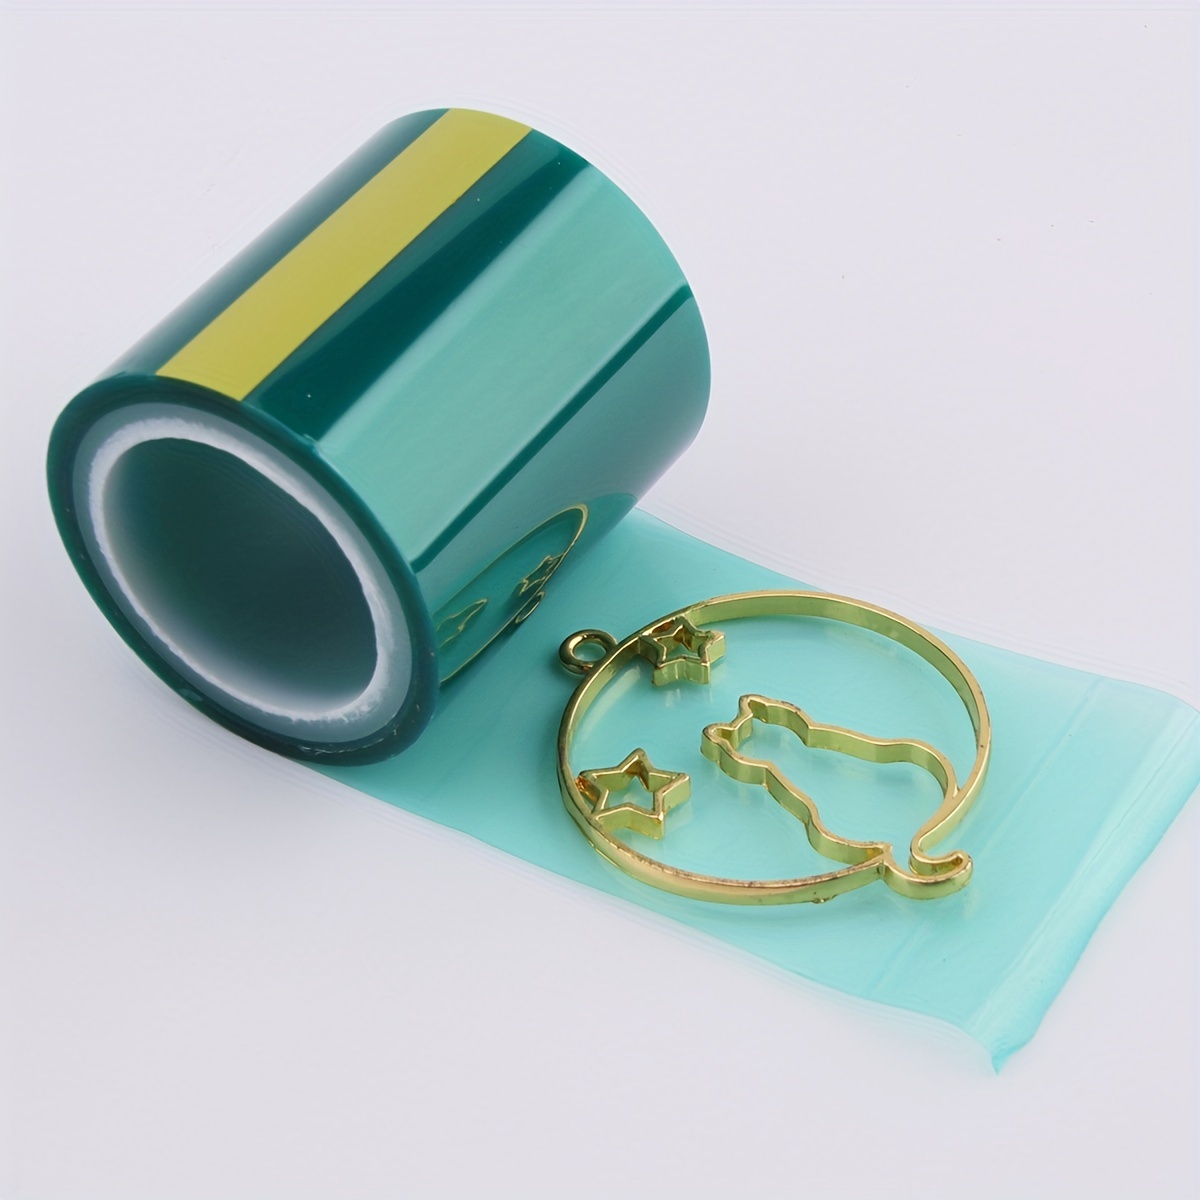 Resin Tape For Epoxy Resin Molding,Traceless Silicone Thermal Adhesive Tape  For Making River Tables Hollow Frame Bezels Epoxy Resin Craft Pendant